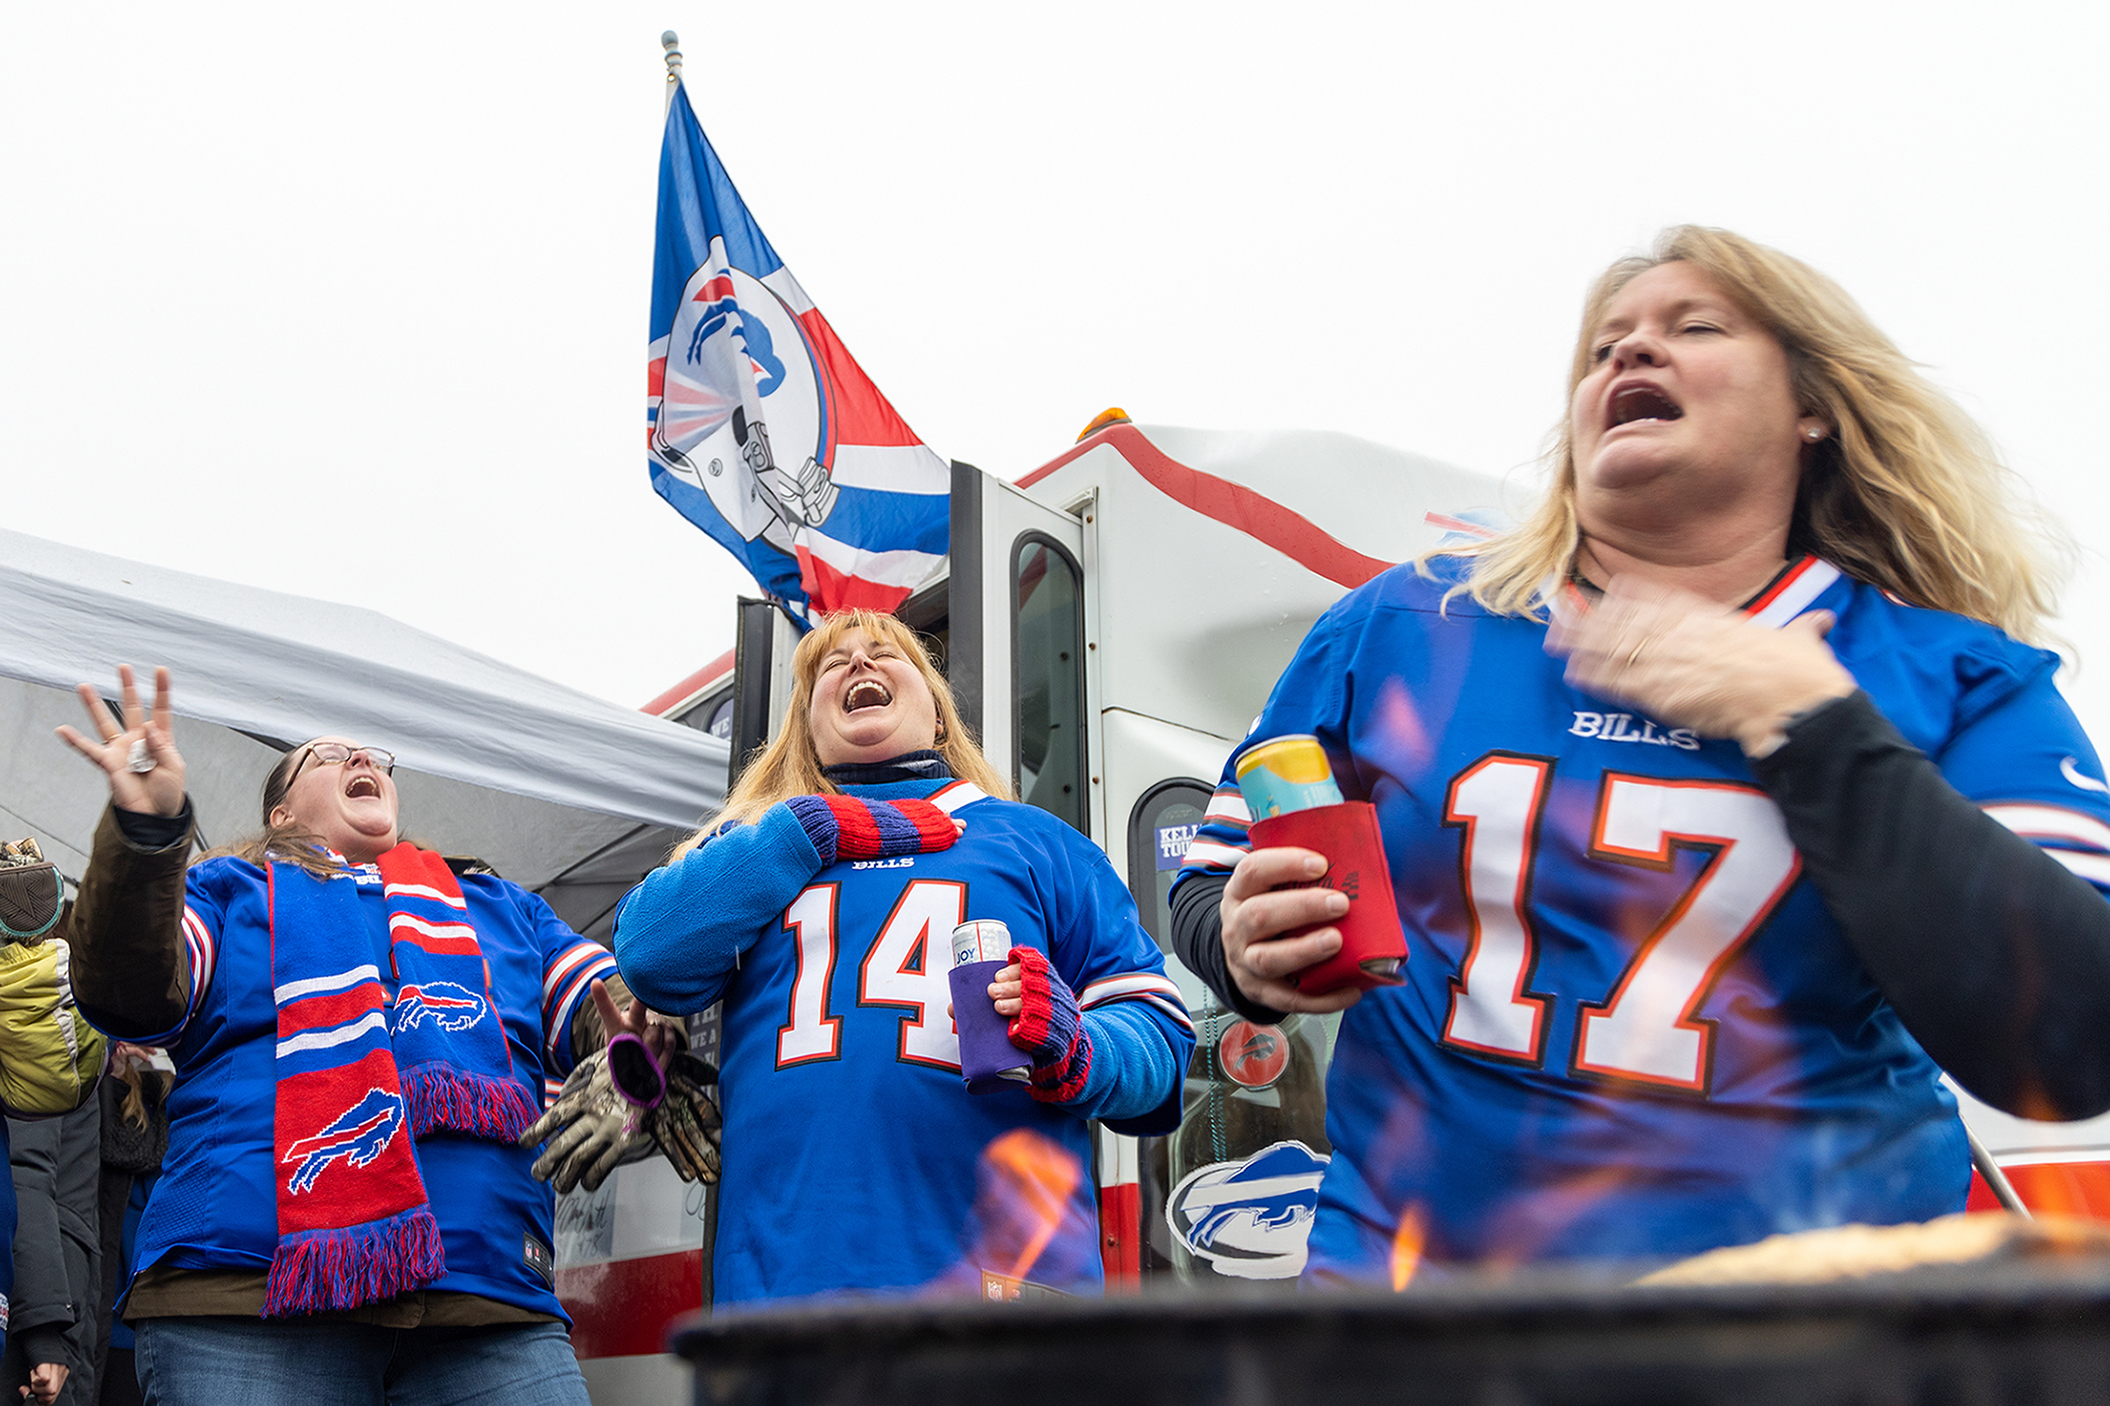 Three women laugh during a tailgate party.